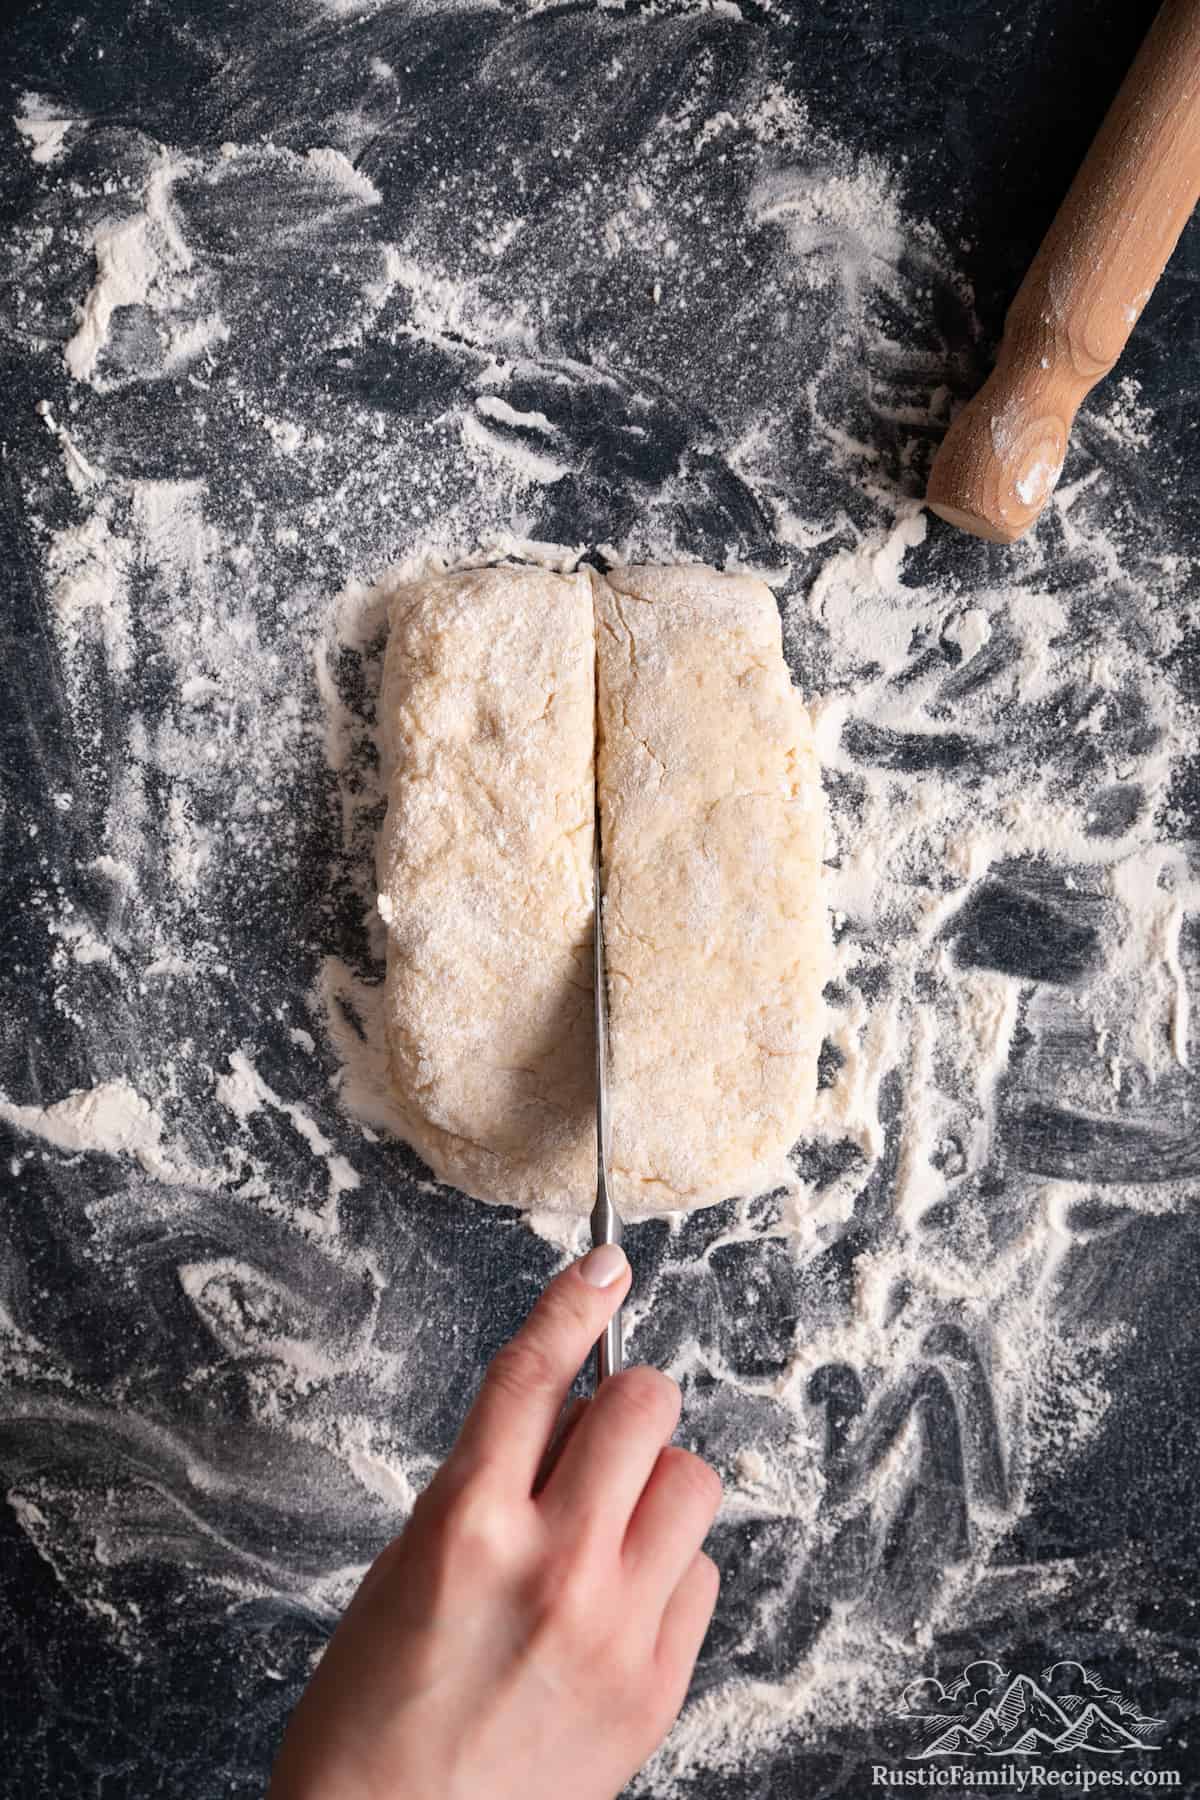 A hand uses a knife to cut a rectangle of shortcake biscuit dough in half lengthwise.